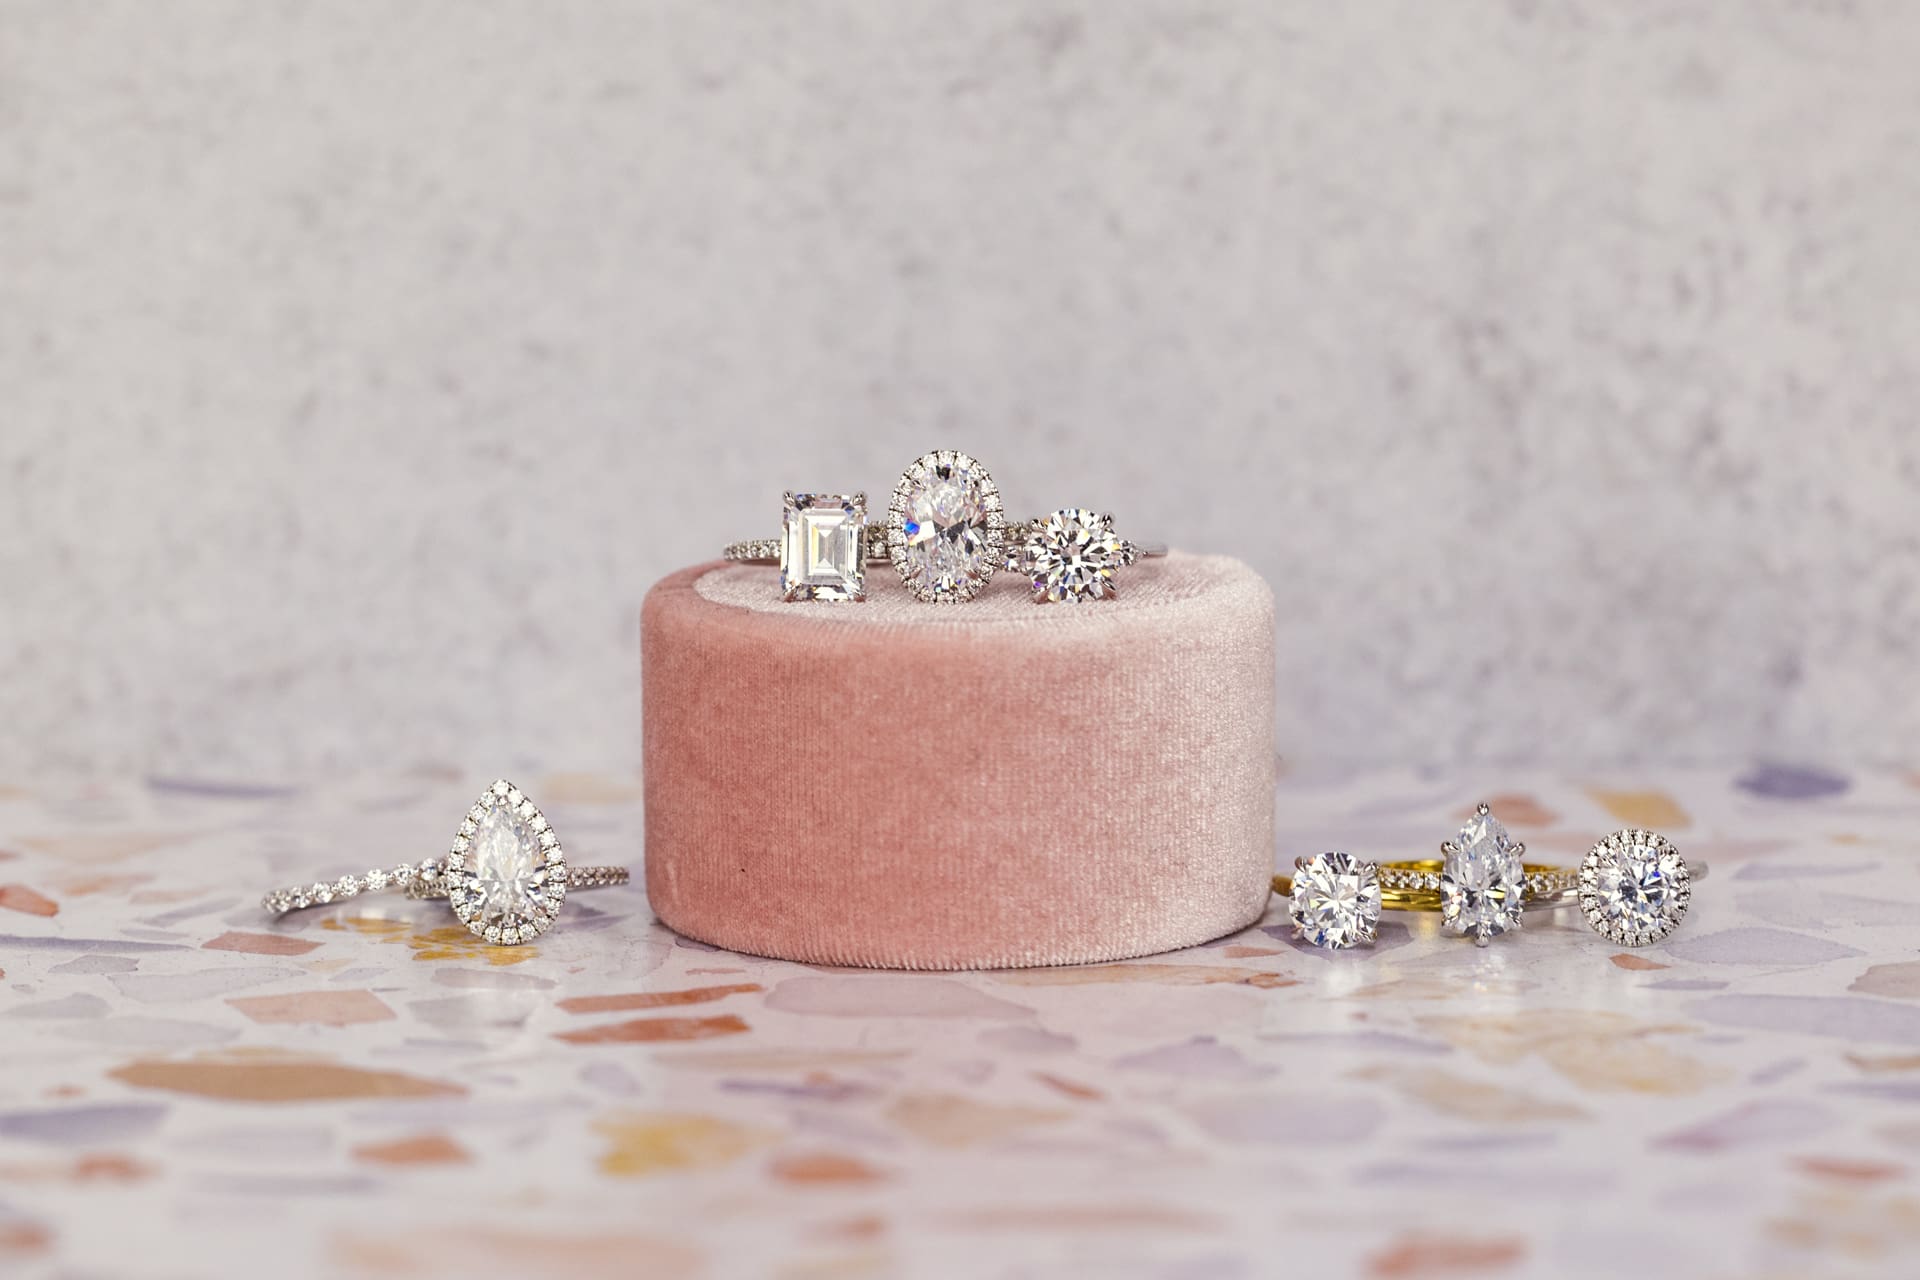 Jewelry product photo of diamond rings designed by Plum Diamonds sitting on pink ring box and pastel mosaic tile counter at Chicago photography studio P&M Studio